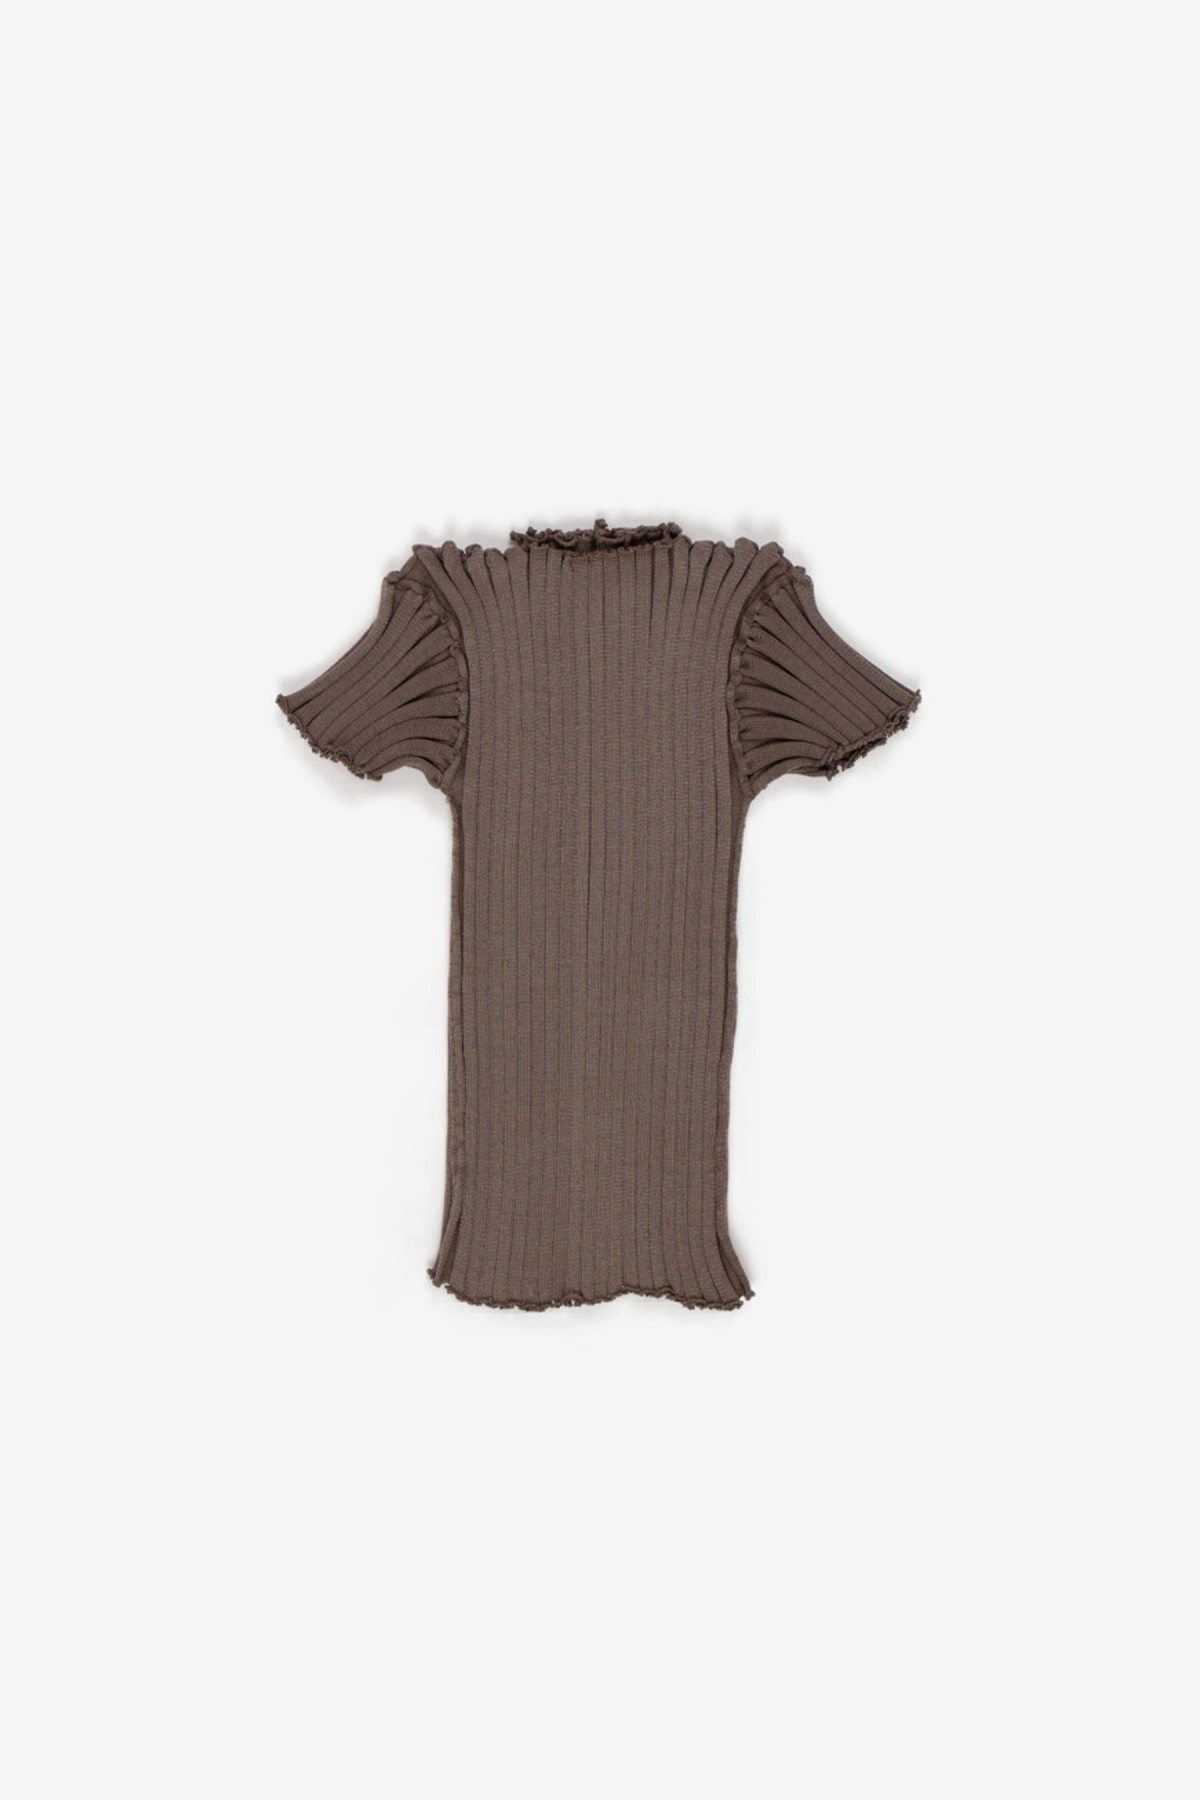 A. Roege Hove Katrine Short Sleeve Cardigan in Taupe